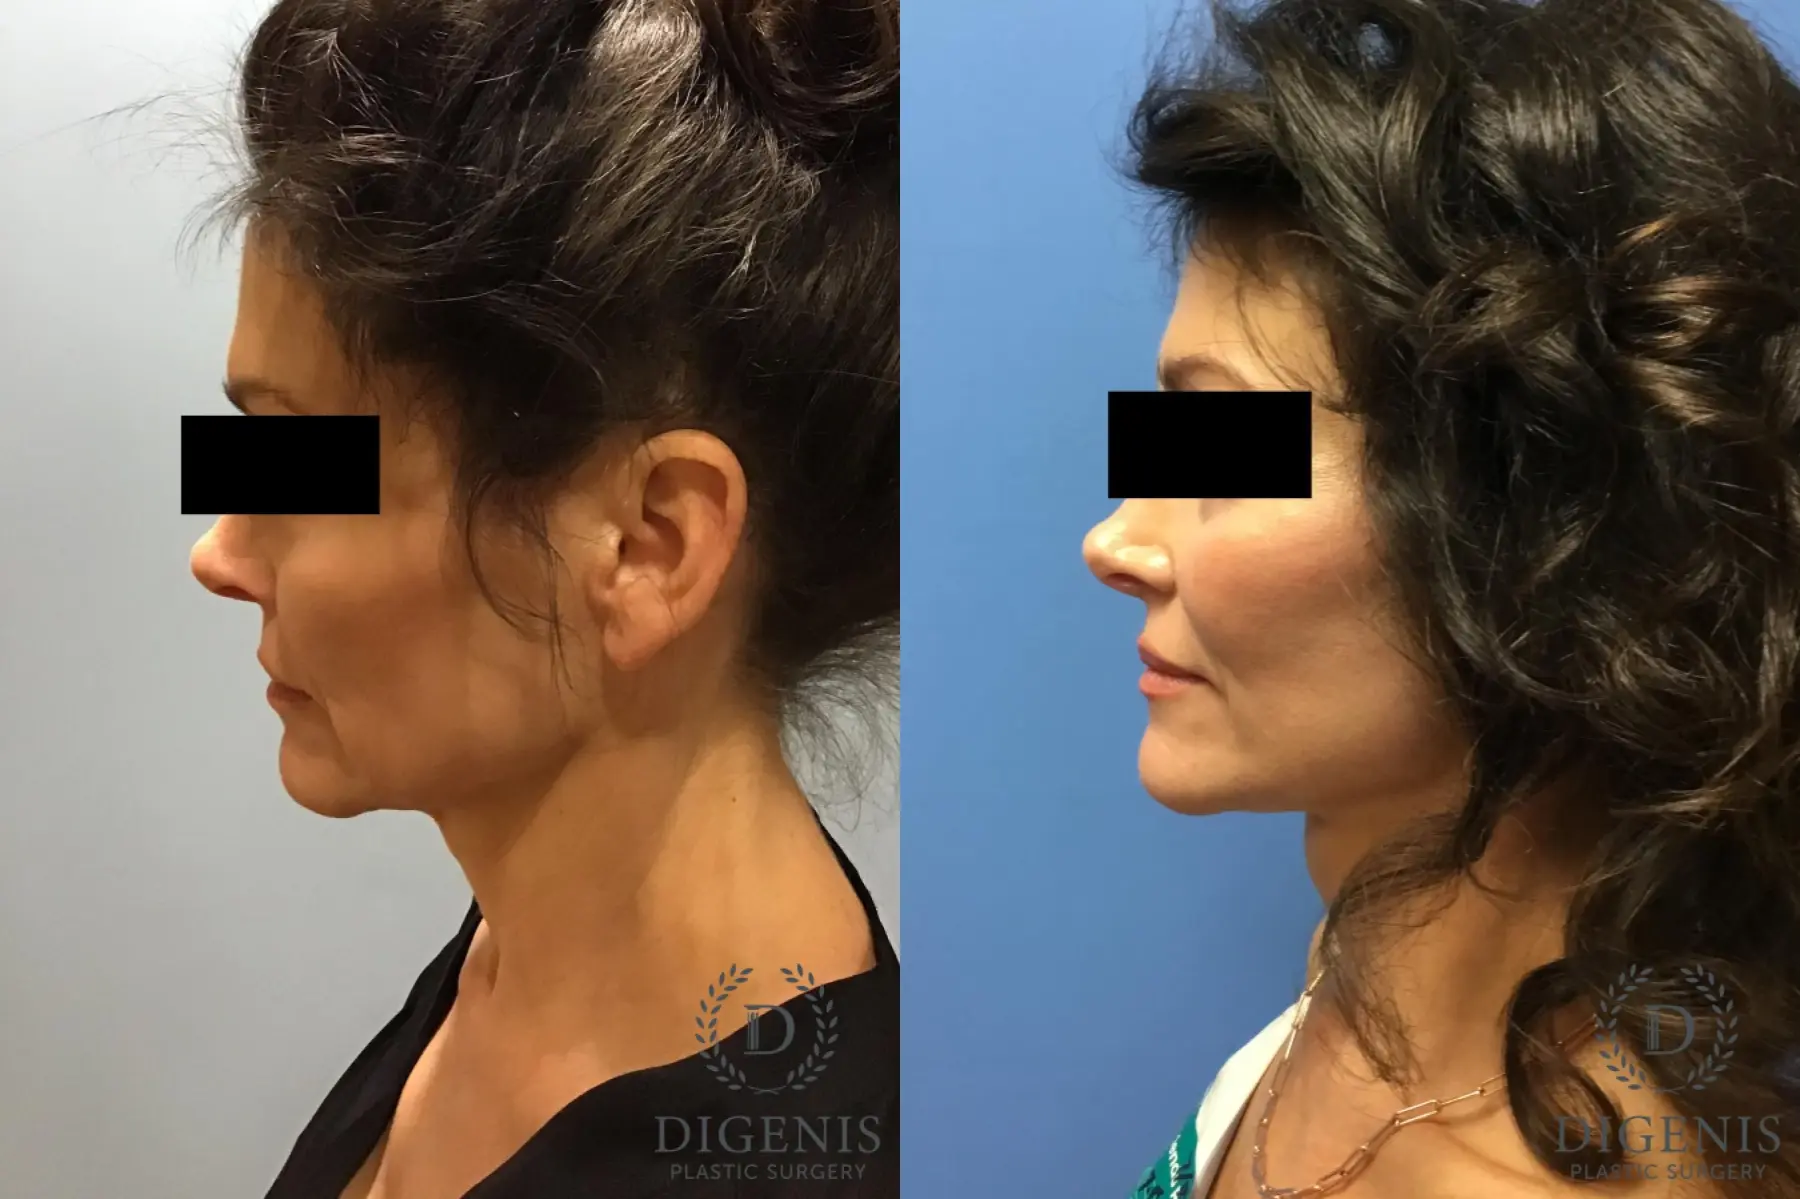 Facelift: Patient 9 - Before and After 3